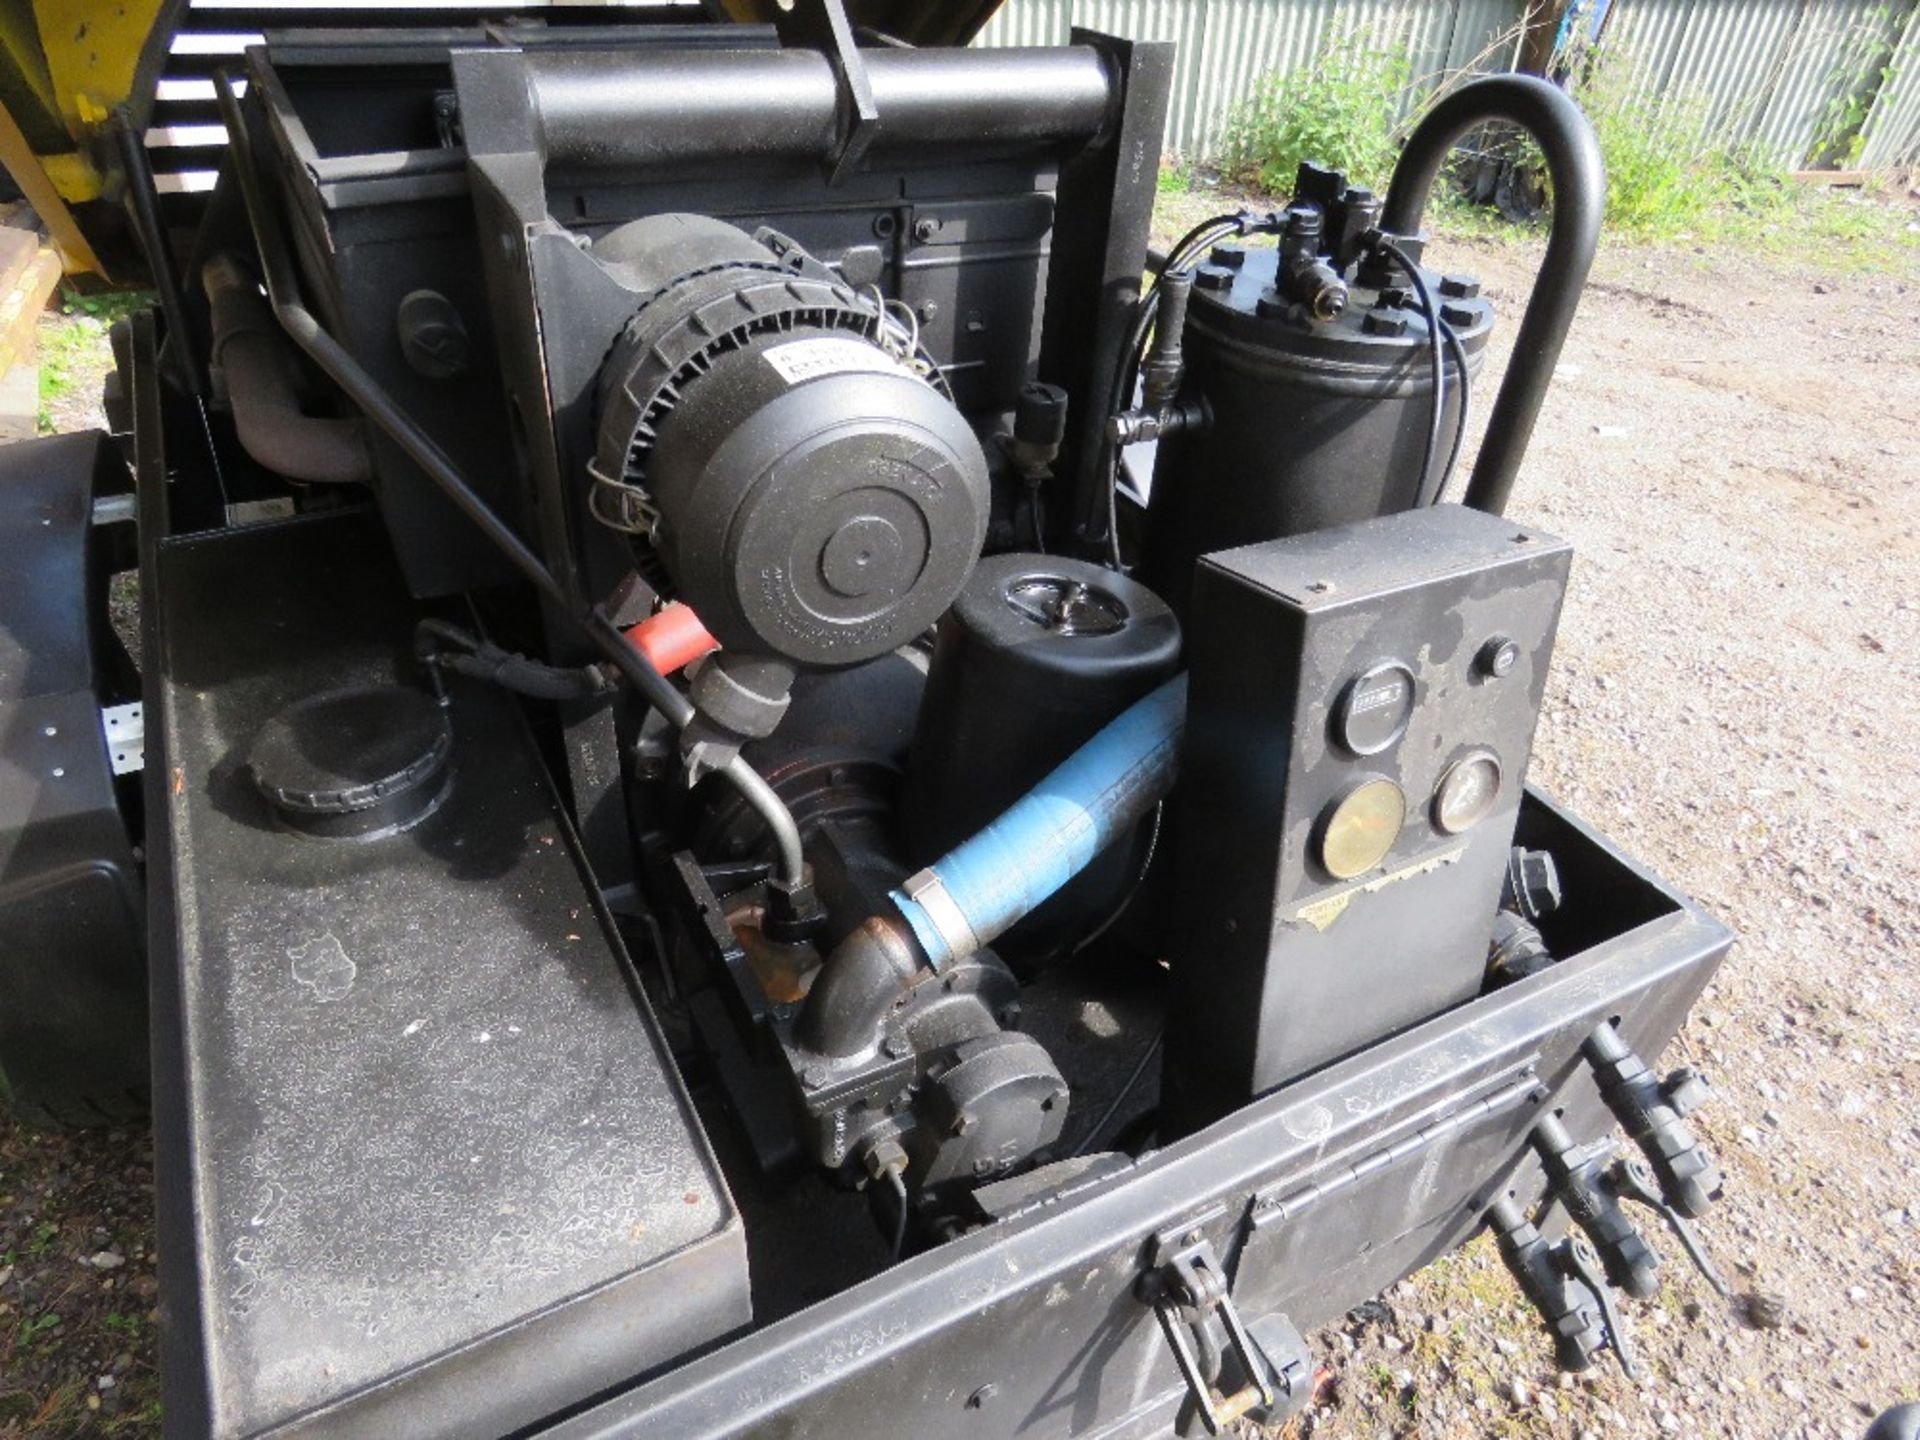 KAESER M50 COMPRESSOR 180CFM OUTPUT WITH 2 X HOSES AND 2 X GUNS. OWNER RETIRING. WHEN TESTED WAS SEE - Image 10 of 16